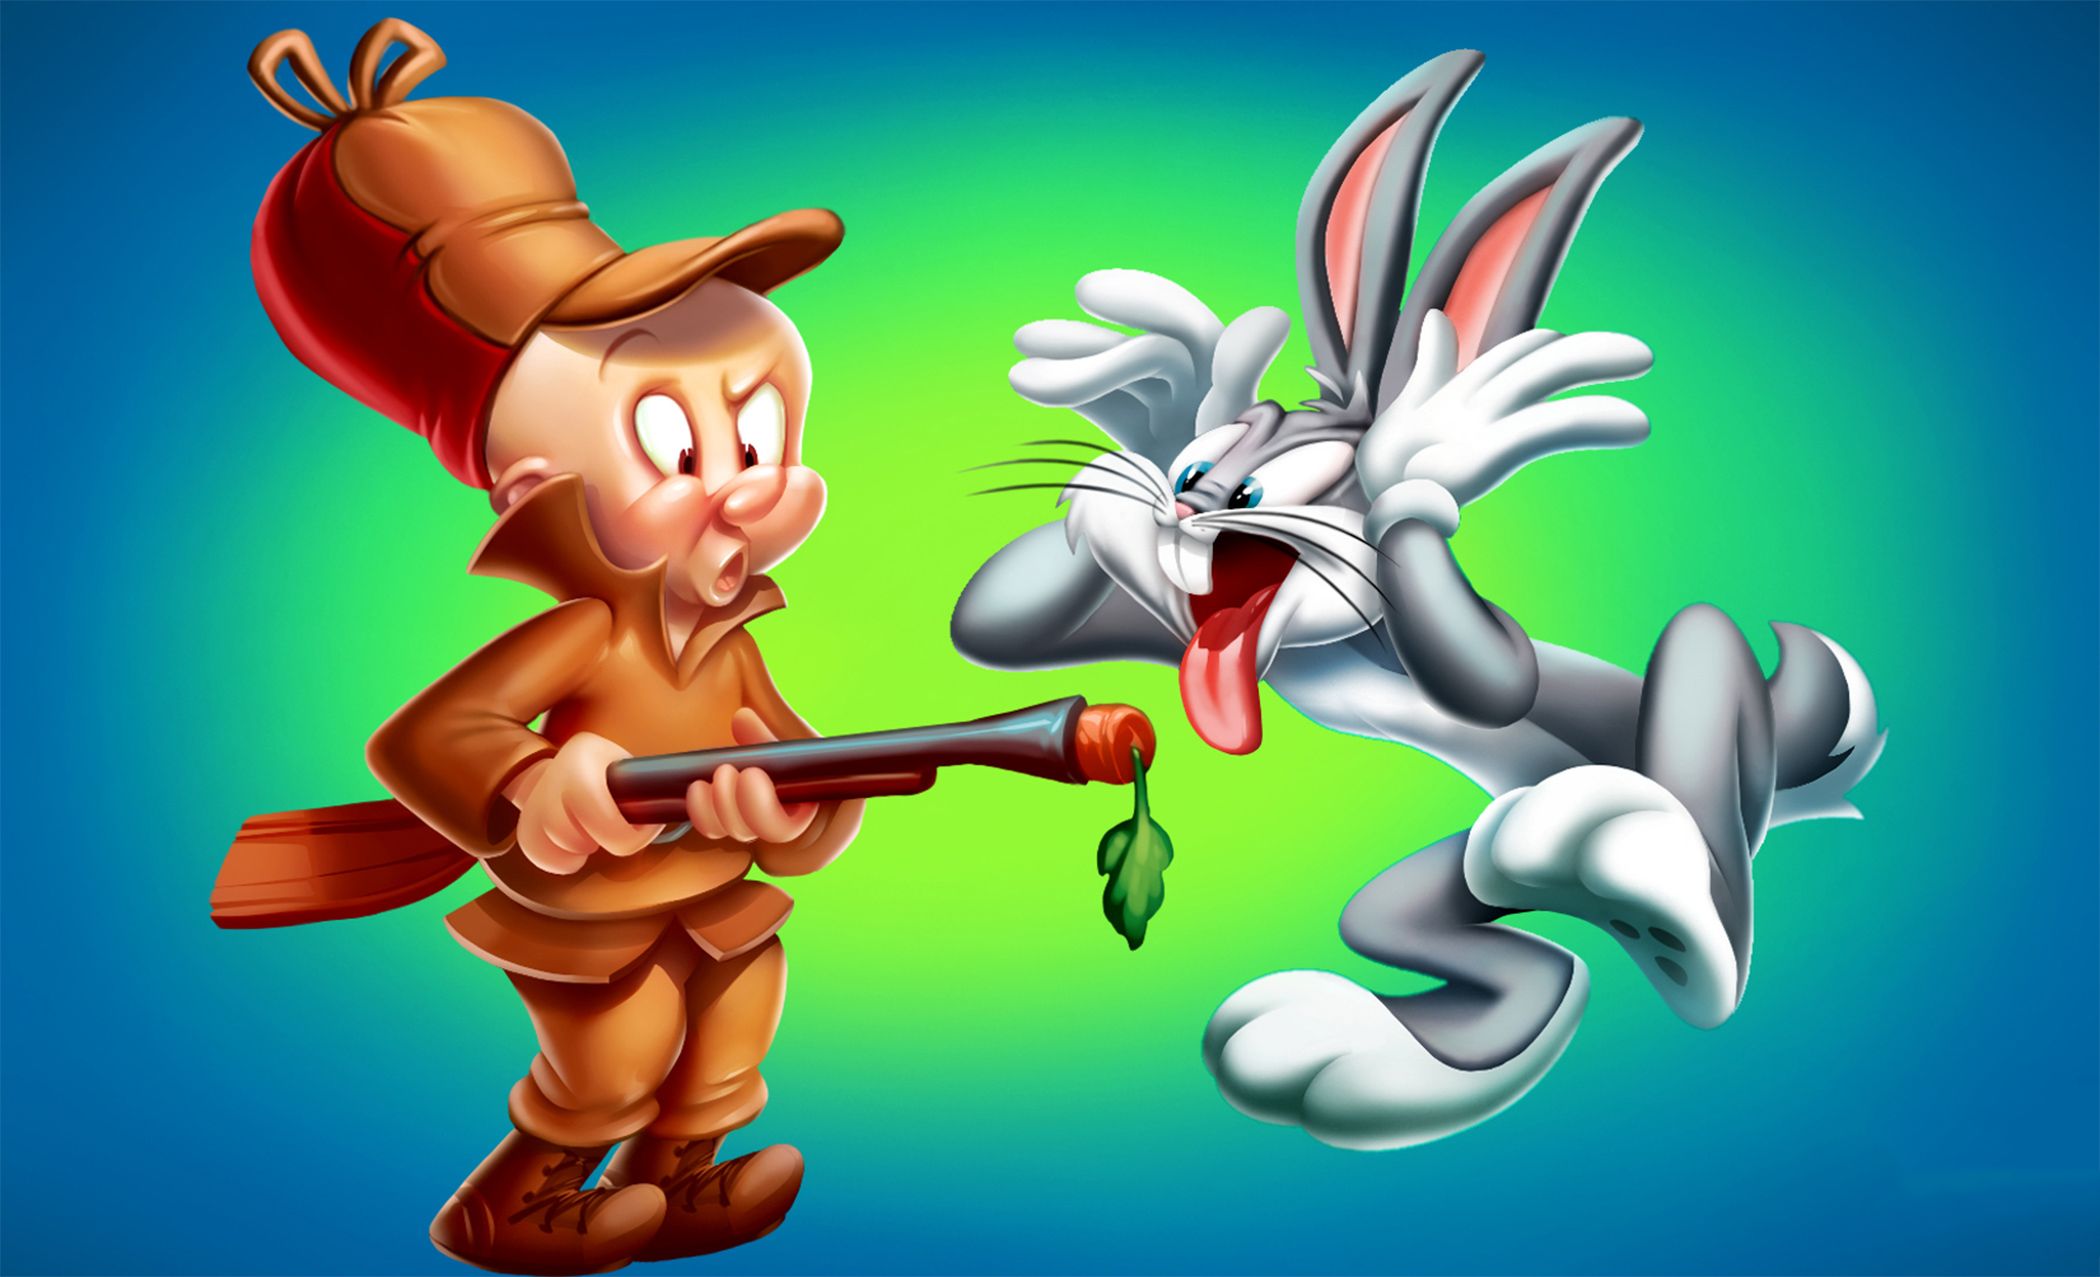 Looney Tunes HD Wallpapers